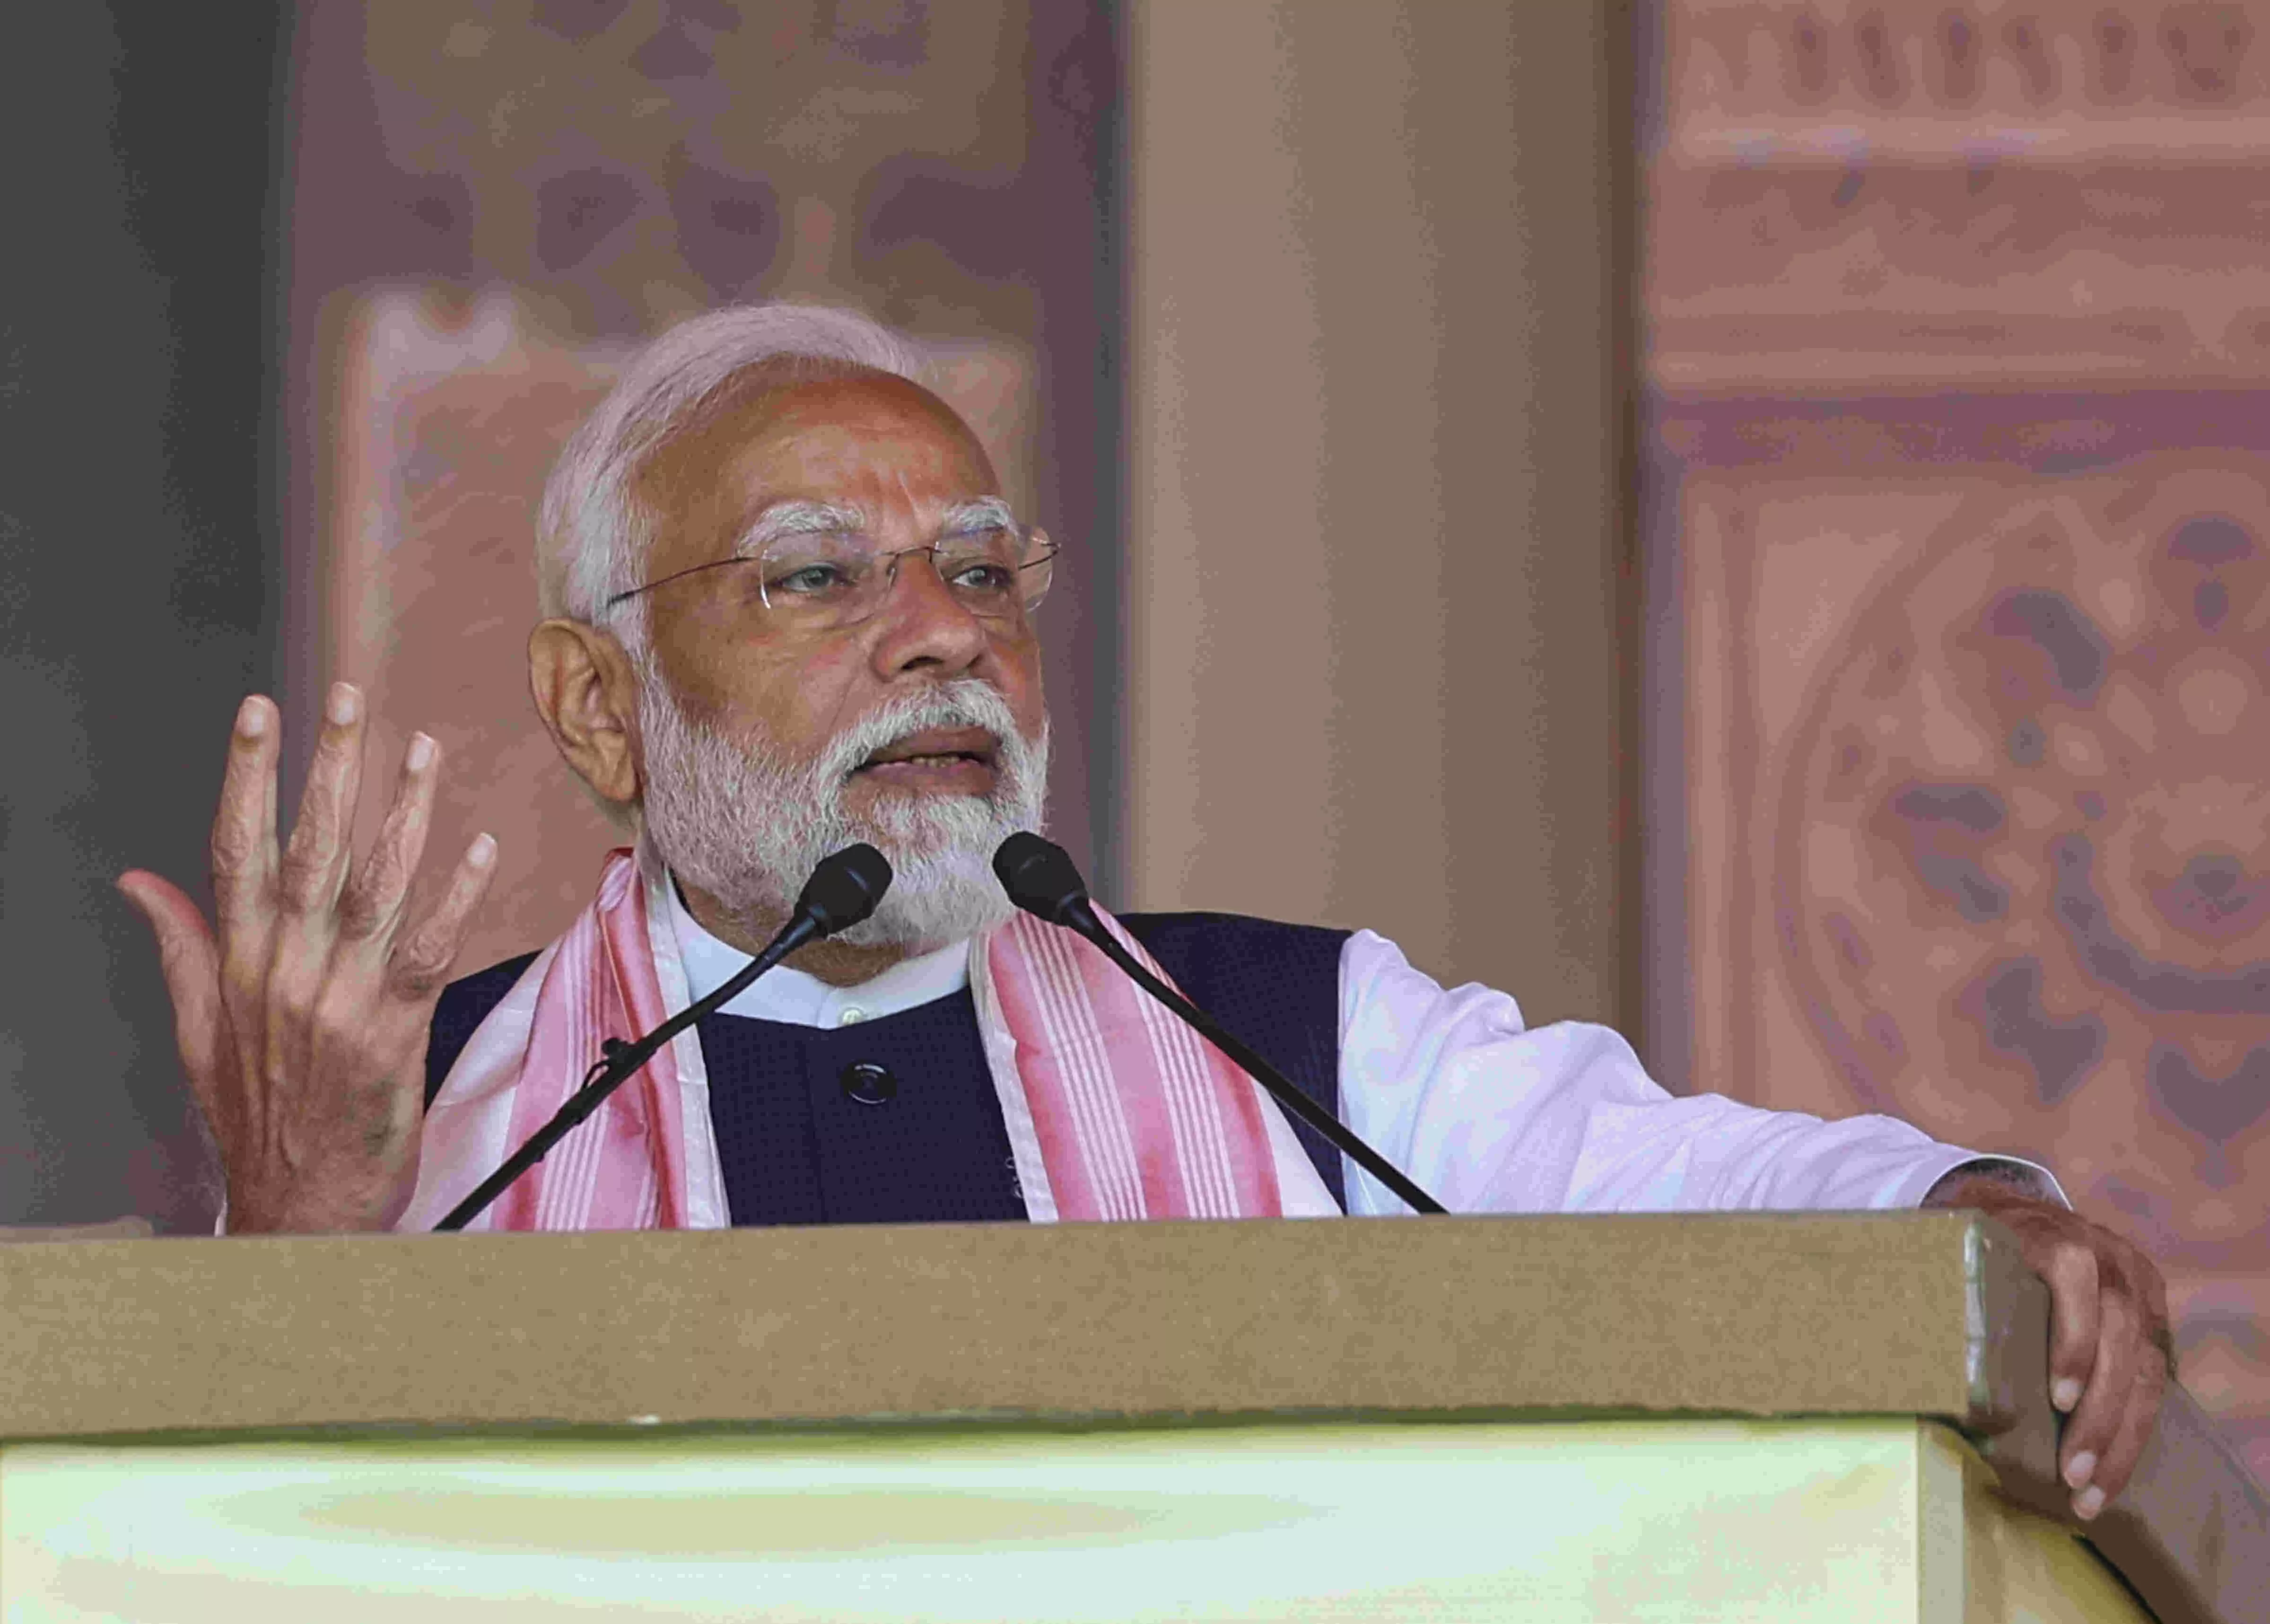 PM Modi unveils projects worth Rs 11,600 cr in Assam